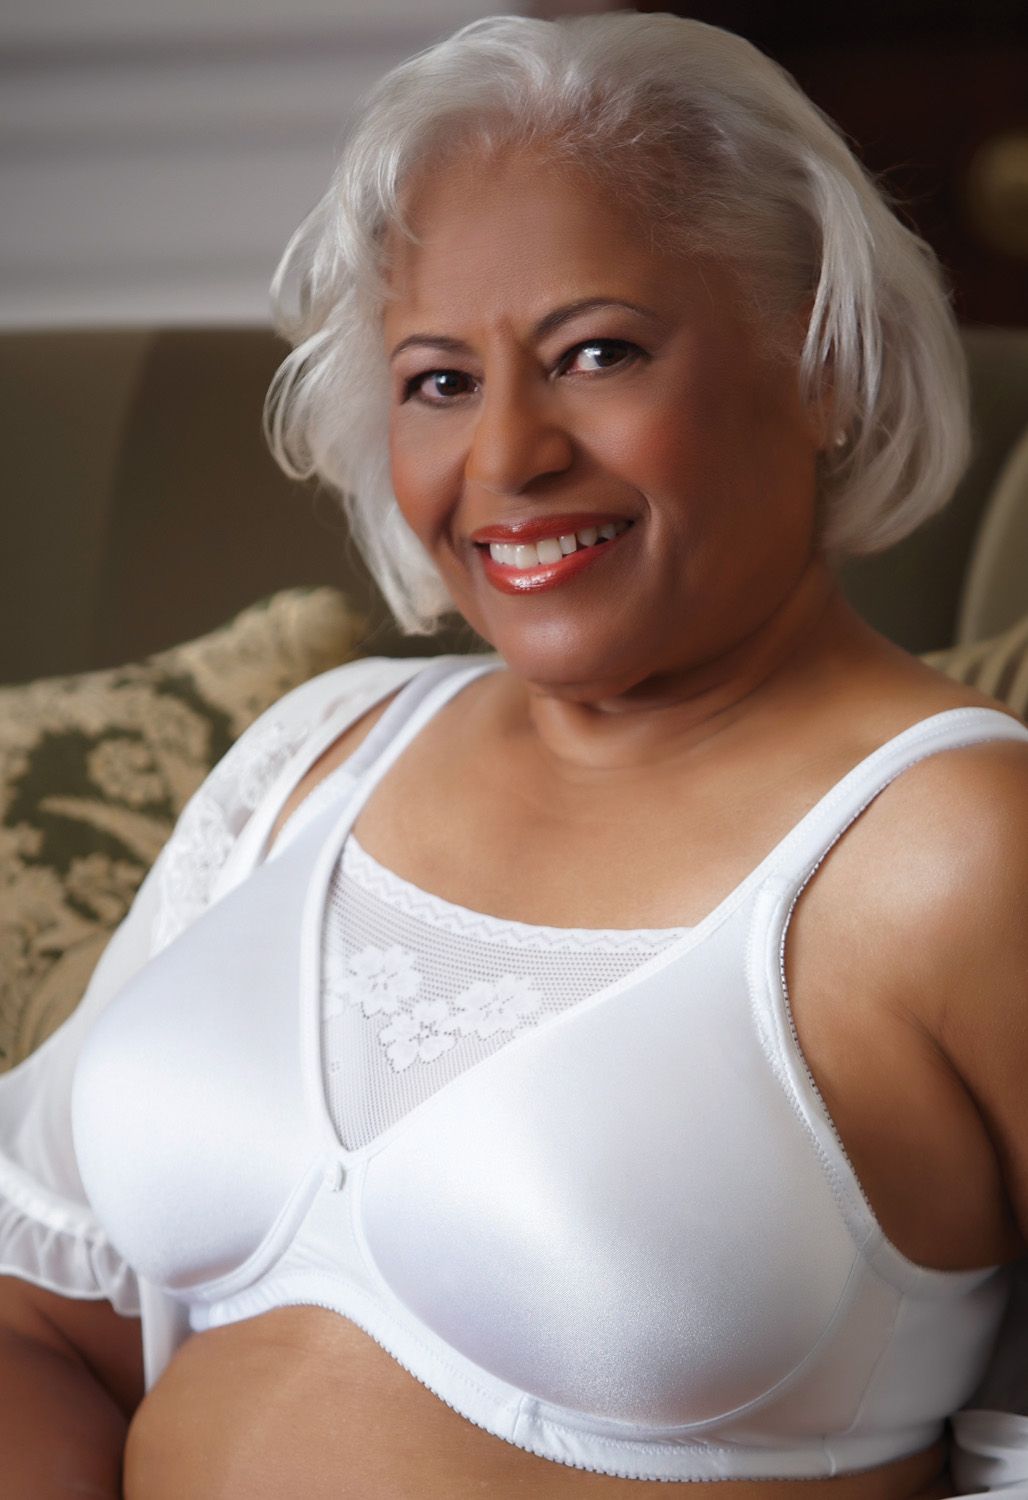 Mastectomy Bras and Prosthesis for Sale - A Fitting Experience Mastectomy  Shoppe